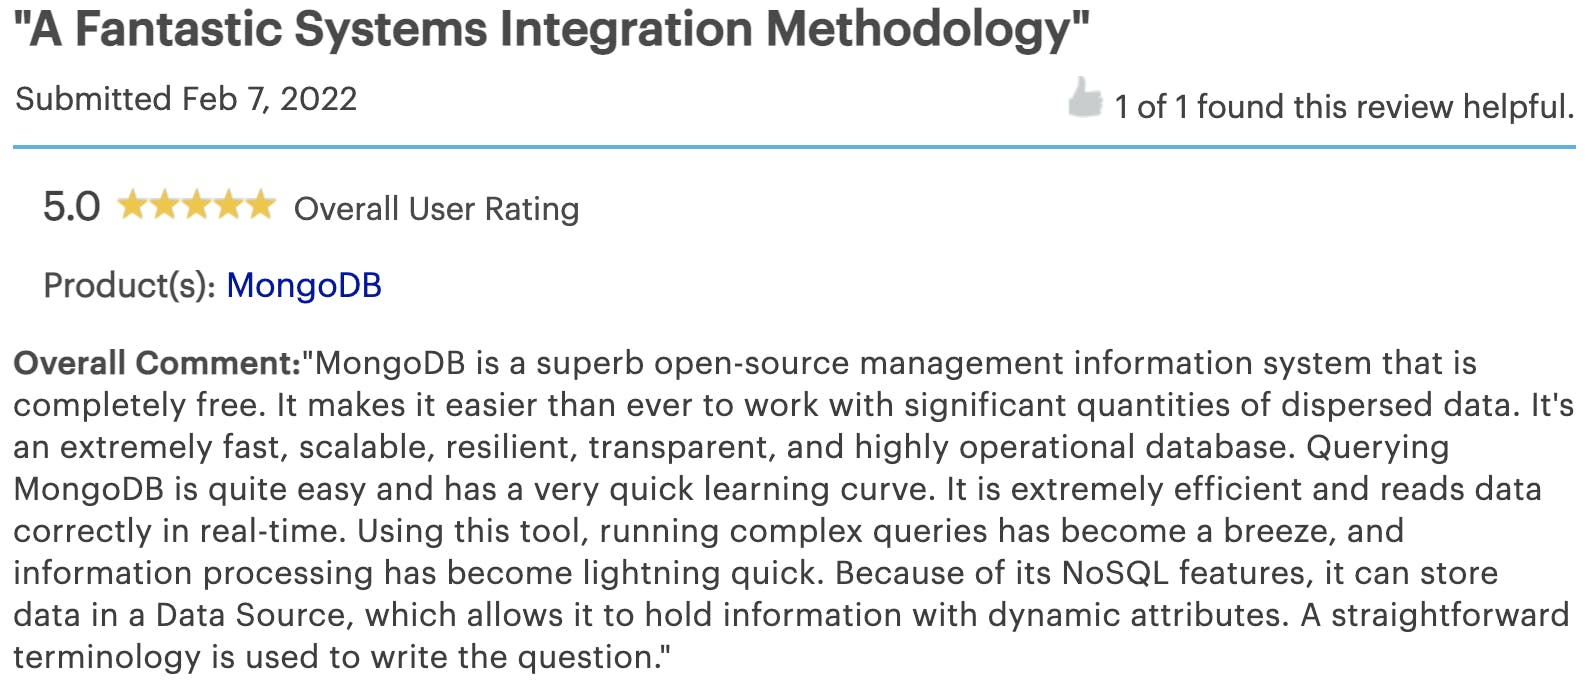 Customer review from an anonymous user providing MongoDB with a 5 star rating. The review reads as follows: MongoDB is a superb open-source management information system that is completely free. It makes it easier than ever to work with significant quantities of dispersed data. It's an extremely fast, scalable, resilient, transparent, and highly operational database. Querying MongoDB is quite easy and has a very quick learning curve. It is extremely efficient and reads data correctly in real-time. Using this tool, running complex queries has become a breeze, and information processing has become lightning quick. Because of its NoSQL features, it can store data in a Data Source, which allows it to hold information with dynamic attributes. A straightforward terminology is used to write the question.